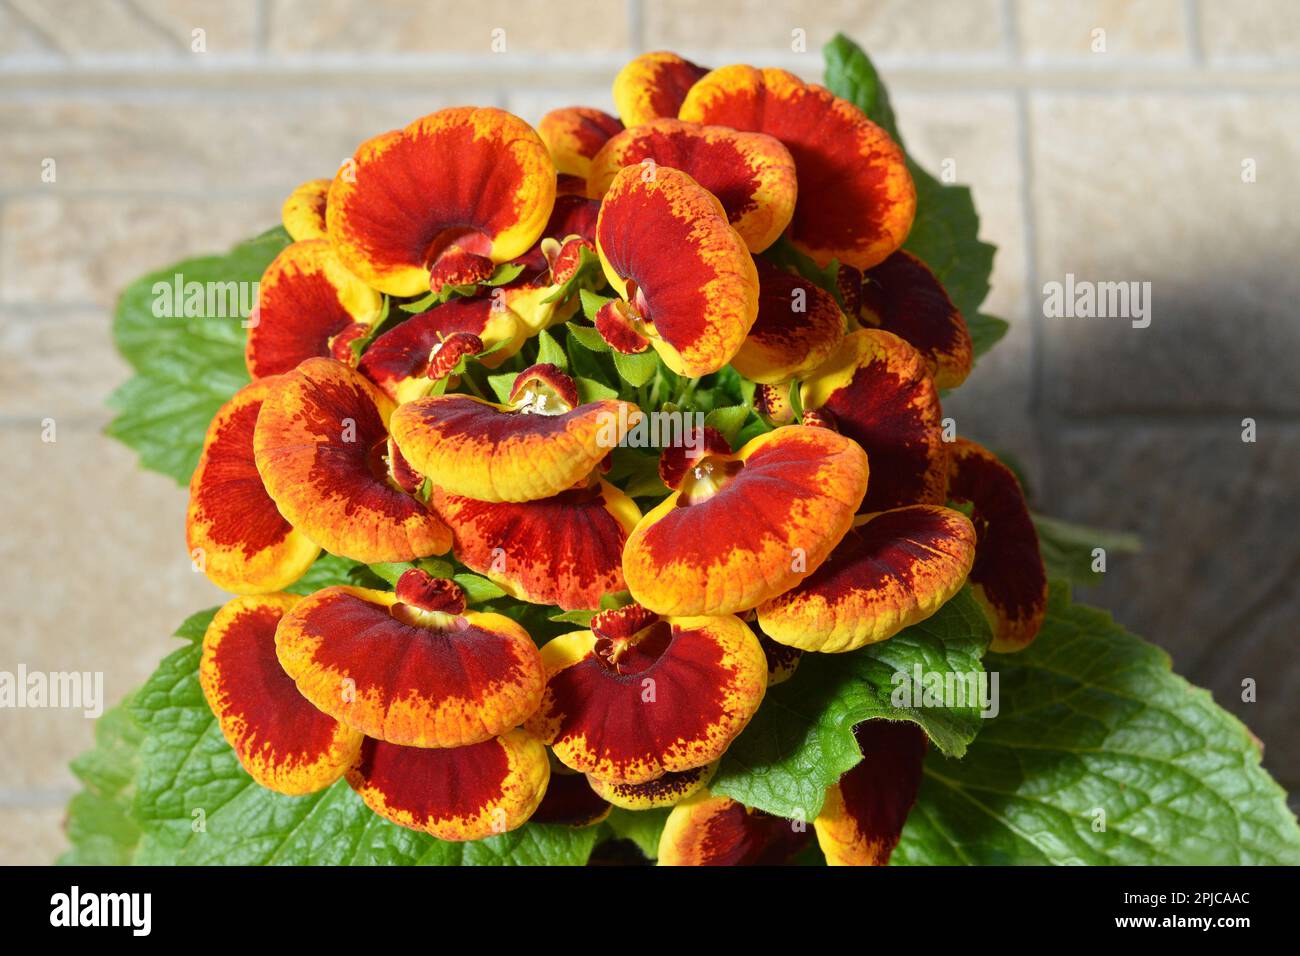 close up of slipper flower calceolaria plant 2PJCAAC